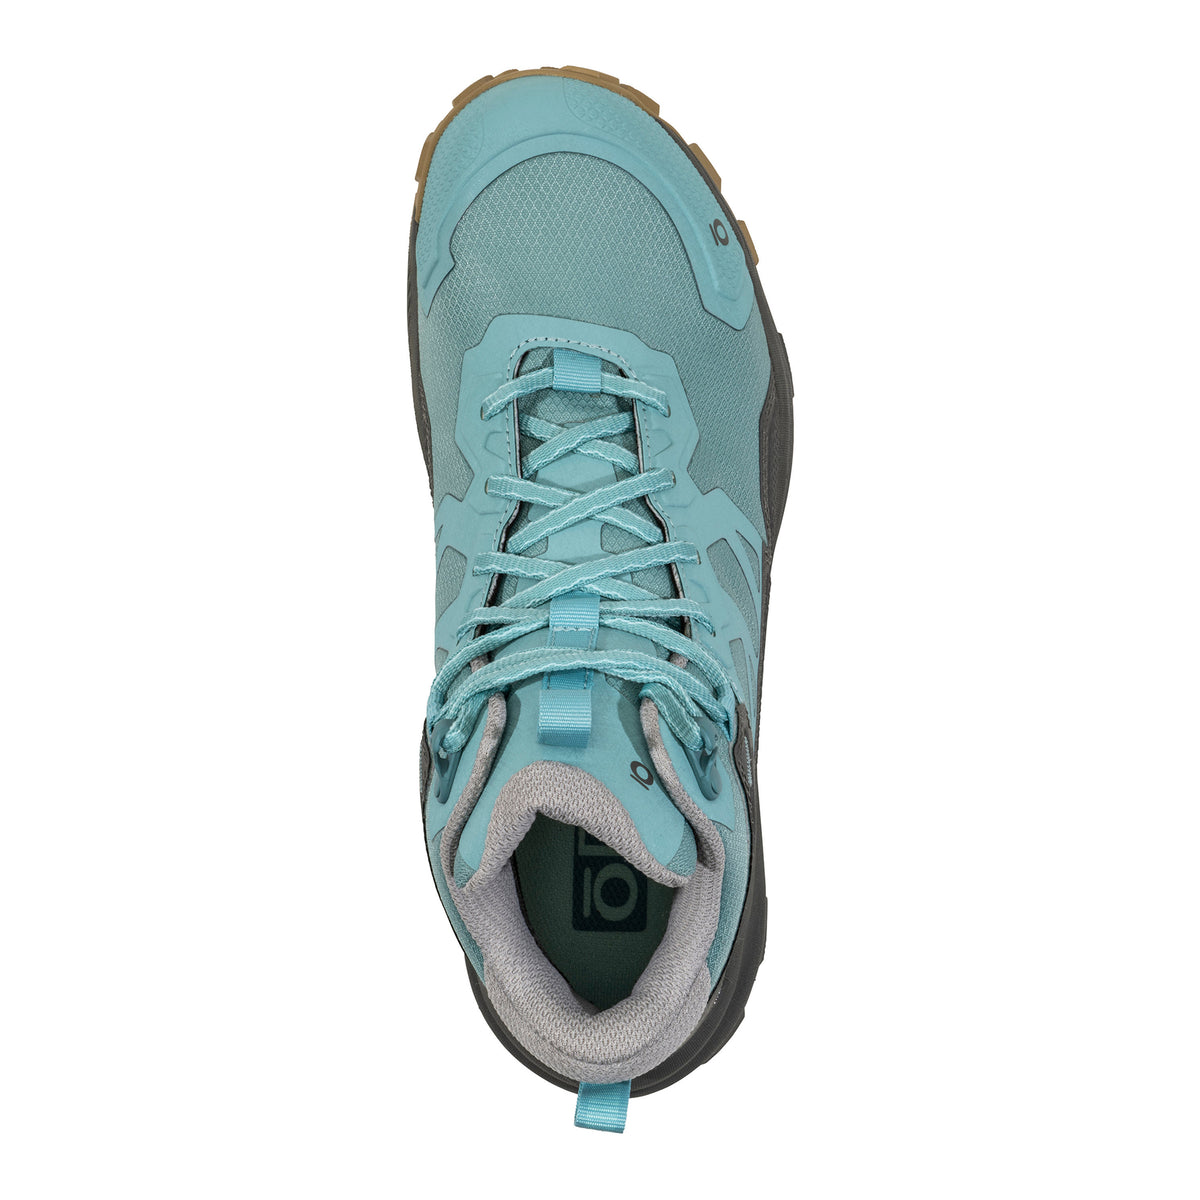 Top view of a single Oboz Katabatic Mid B-Dry Island hiking shoe with laces.